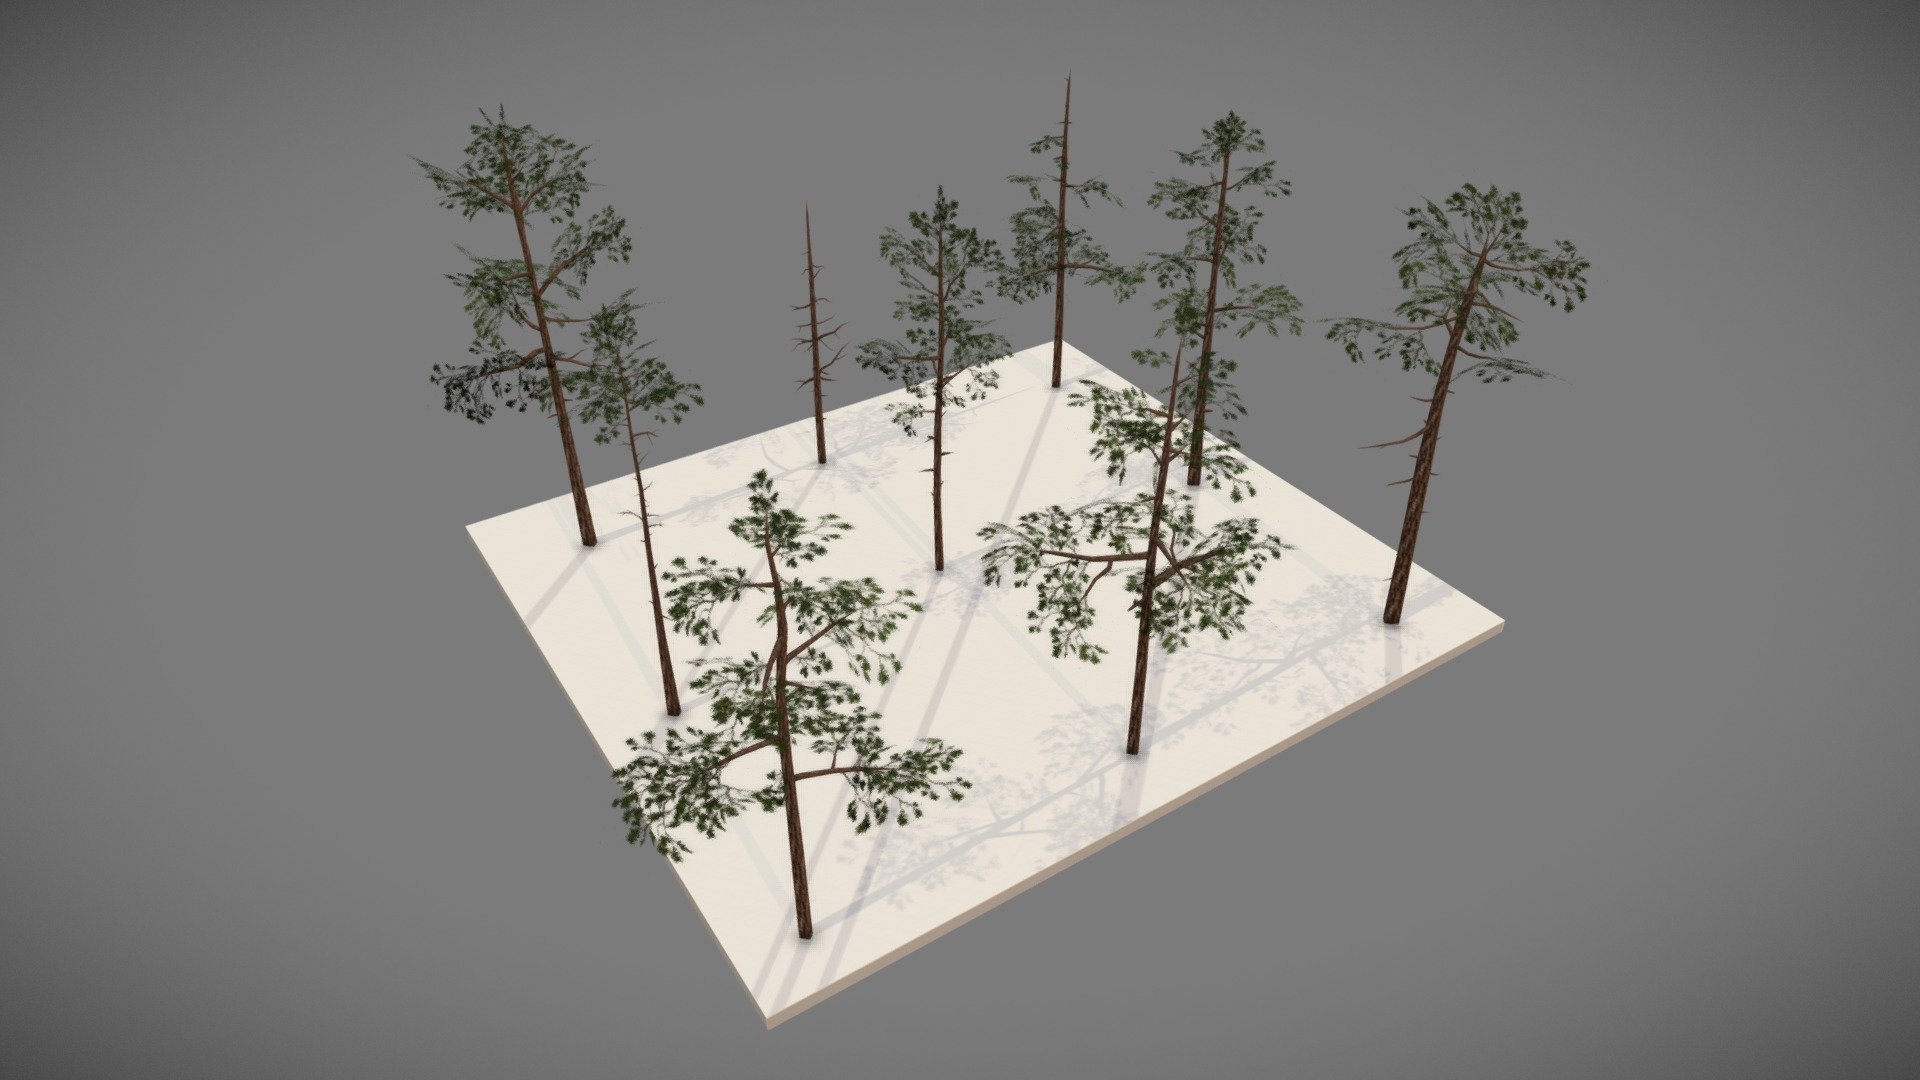 This is a collection of 9 low poly pine tree models 3d model